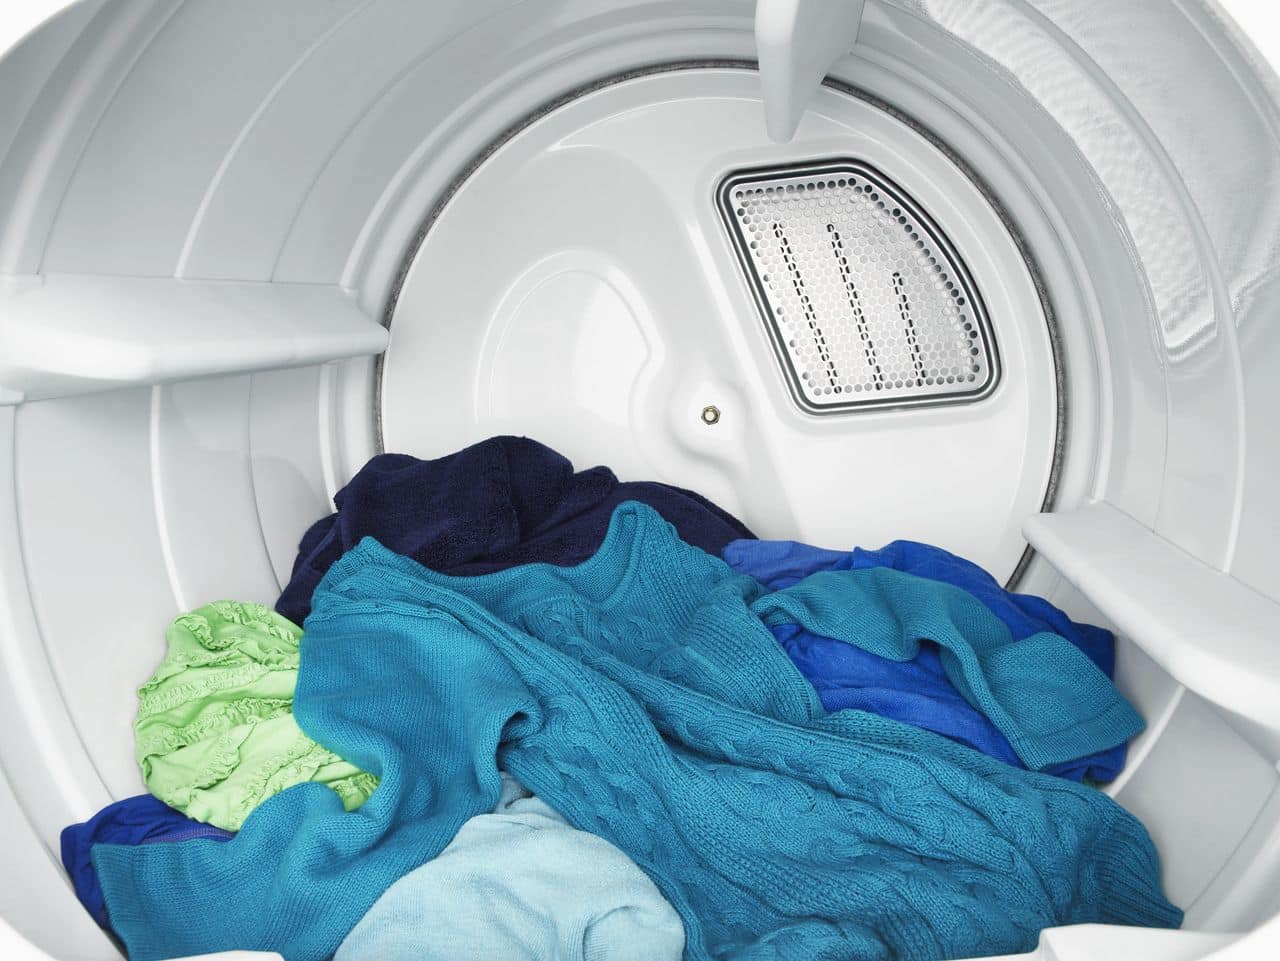 måtte Opbevares i køleskab Creed How To Prevent Clothes From Shrinking In The Dryer - Fred's Appliance